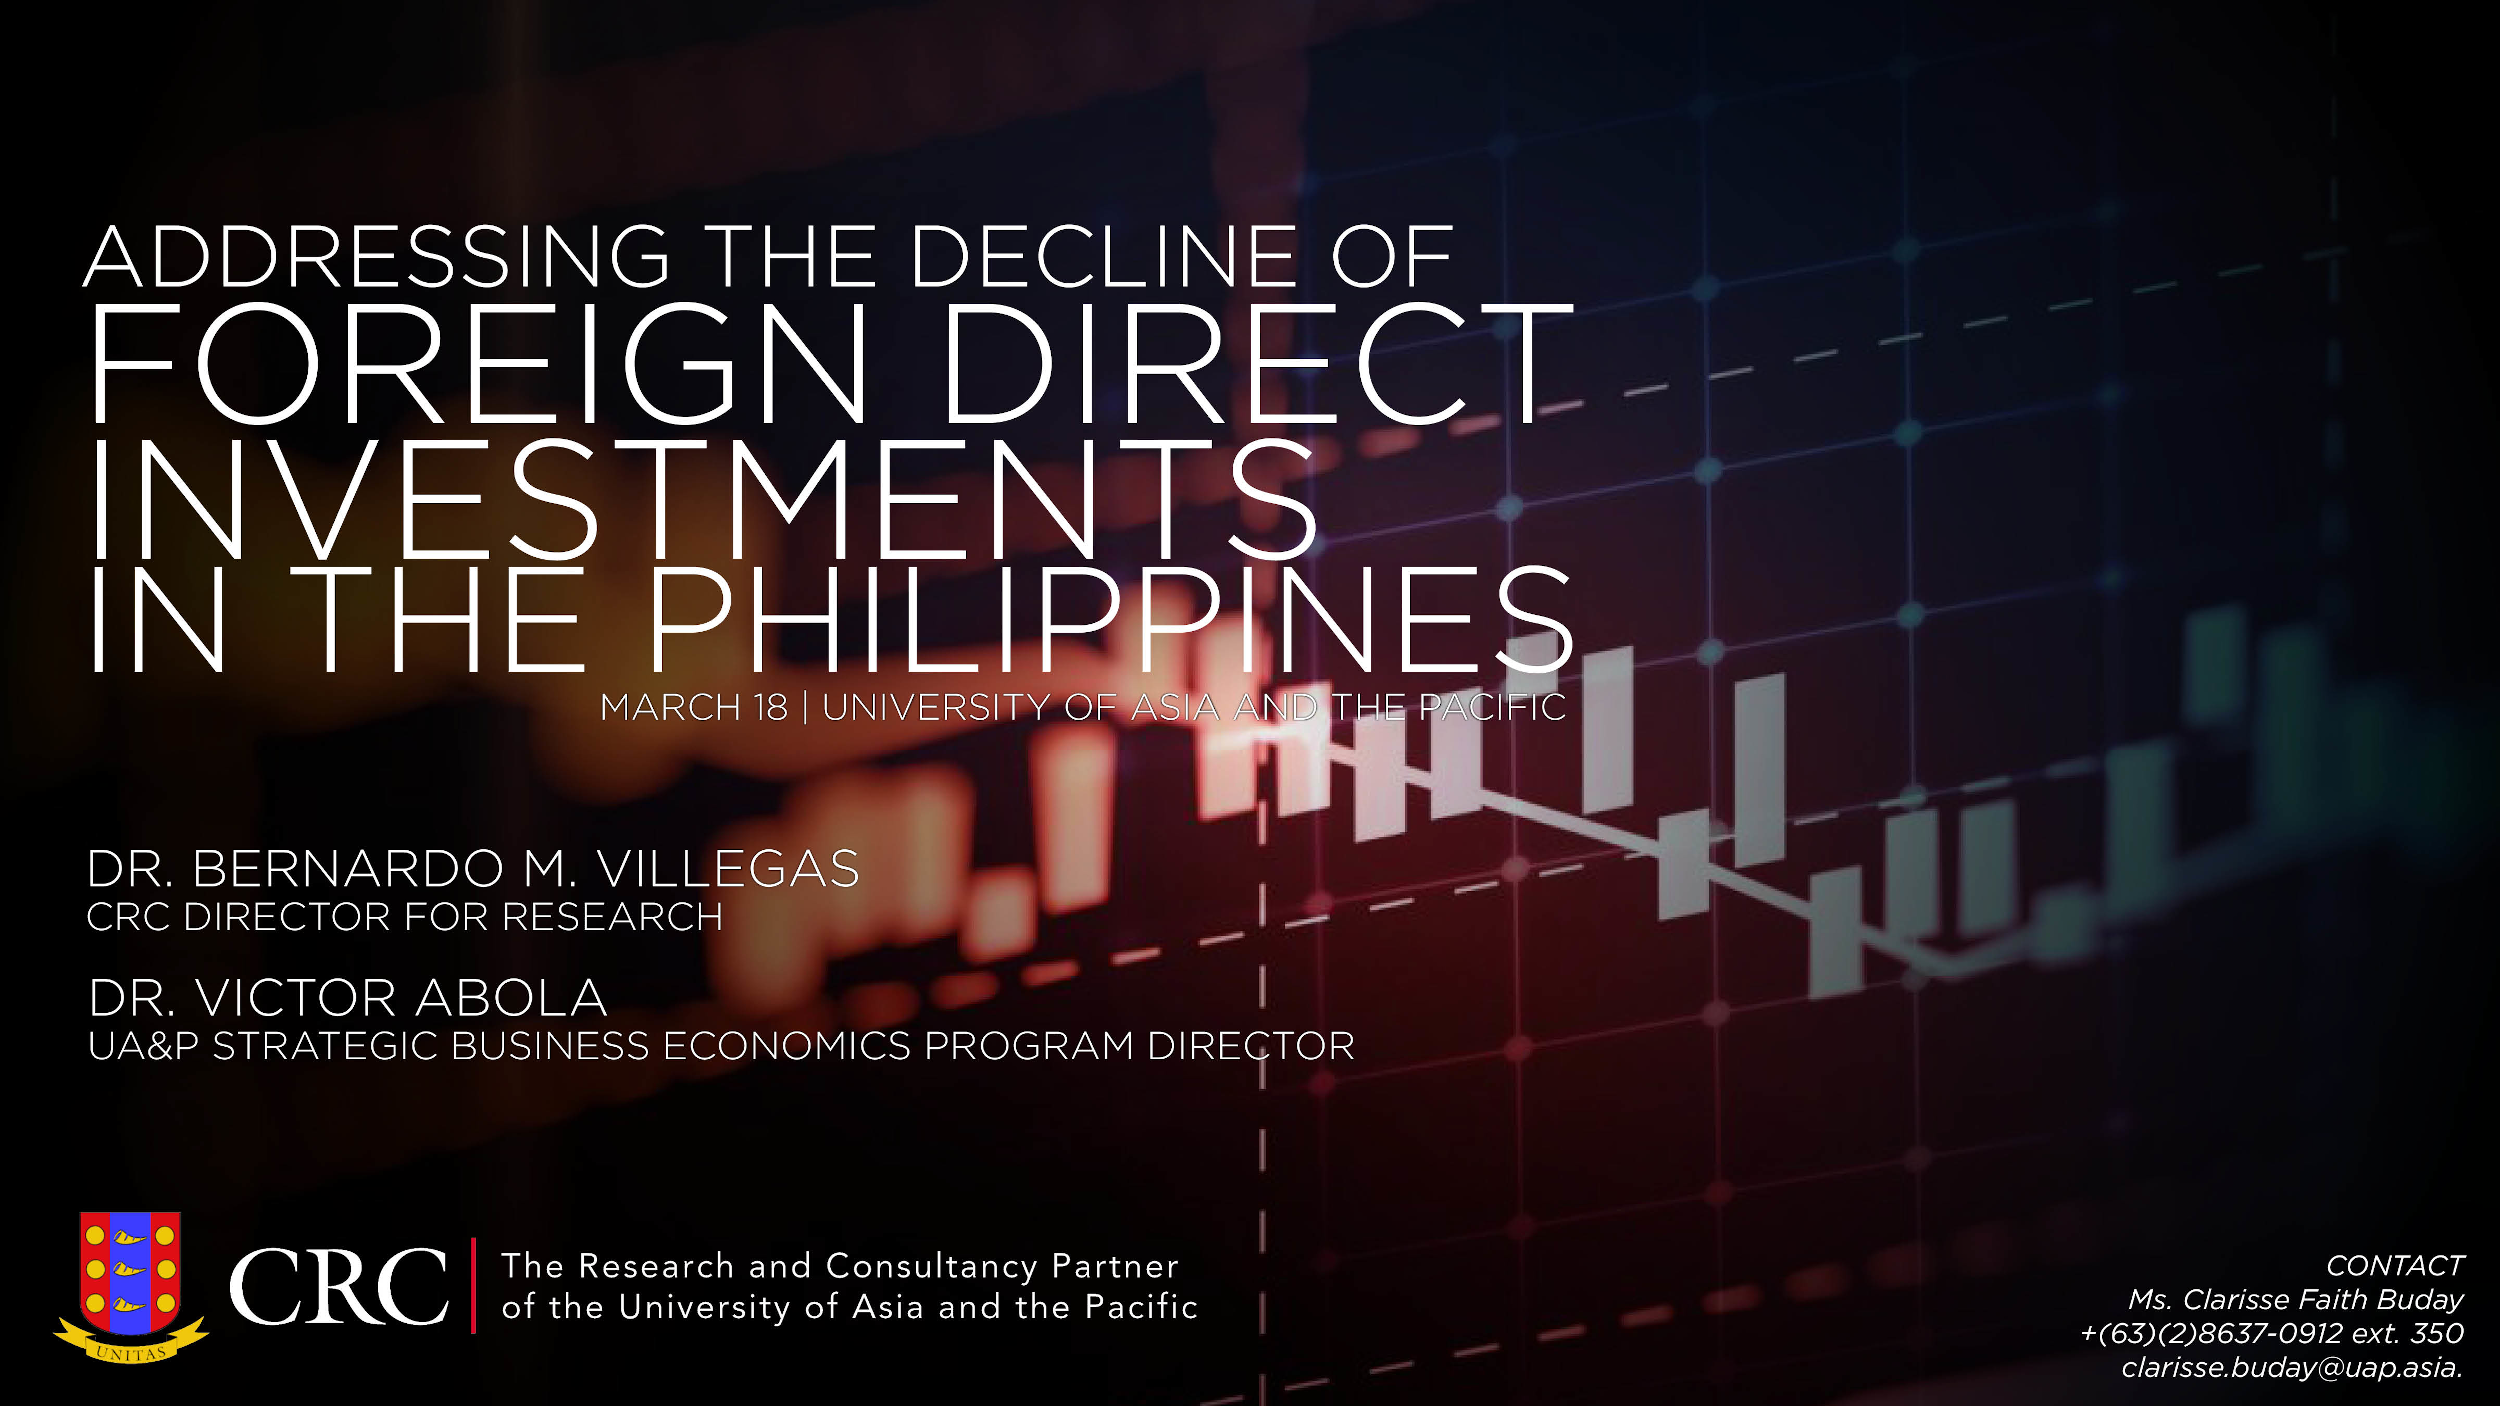 CRC is bringing together key businessmen, academics, and other relevant industry players on March 18 for an in-depth discussion on Addressing the Decline of FDIs in the Philippines. Dr. Bernardo M. Villegas and Director Dr. Victor Abola will speak at the event.